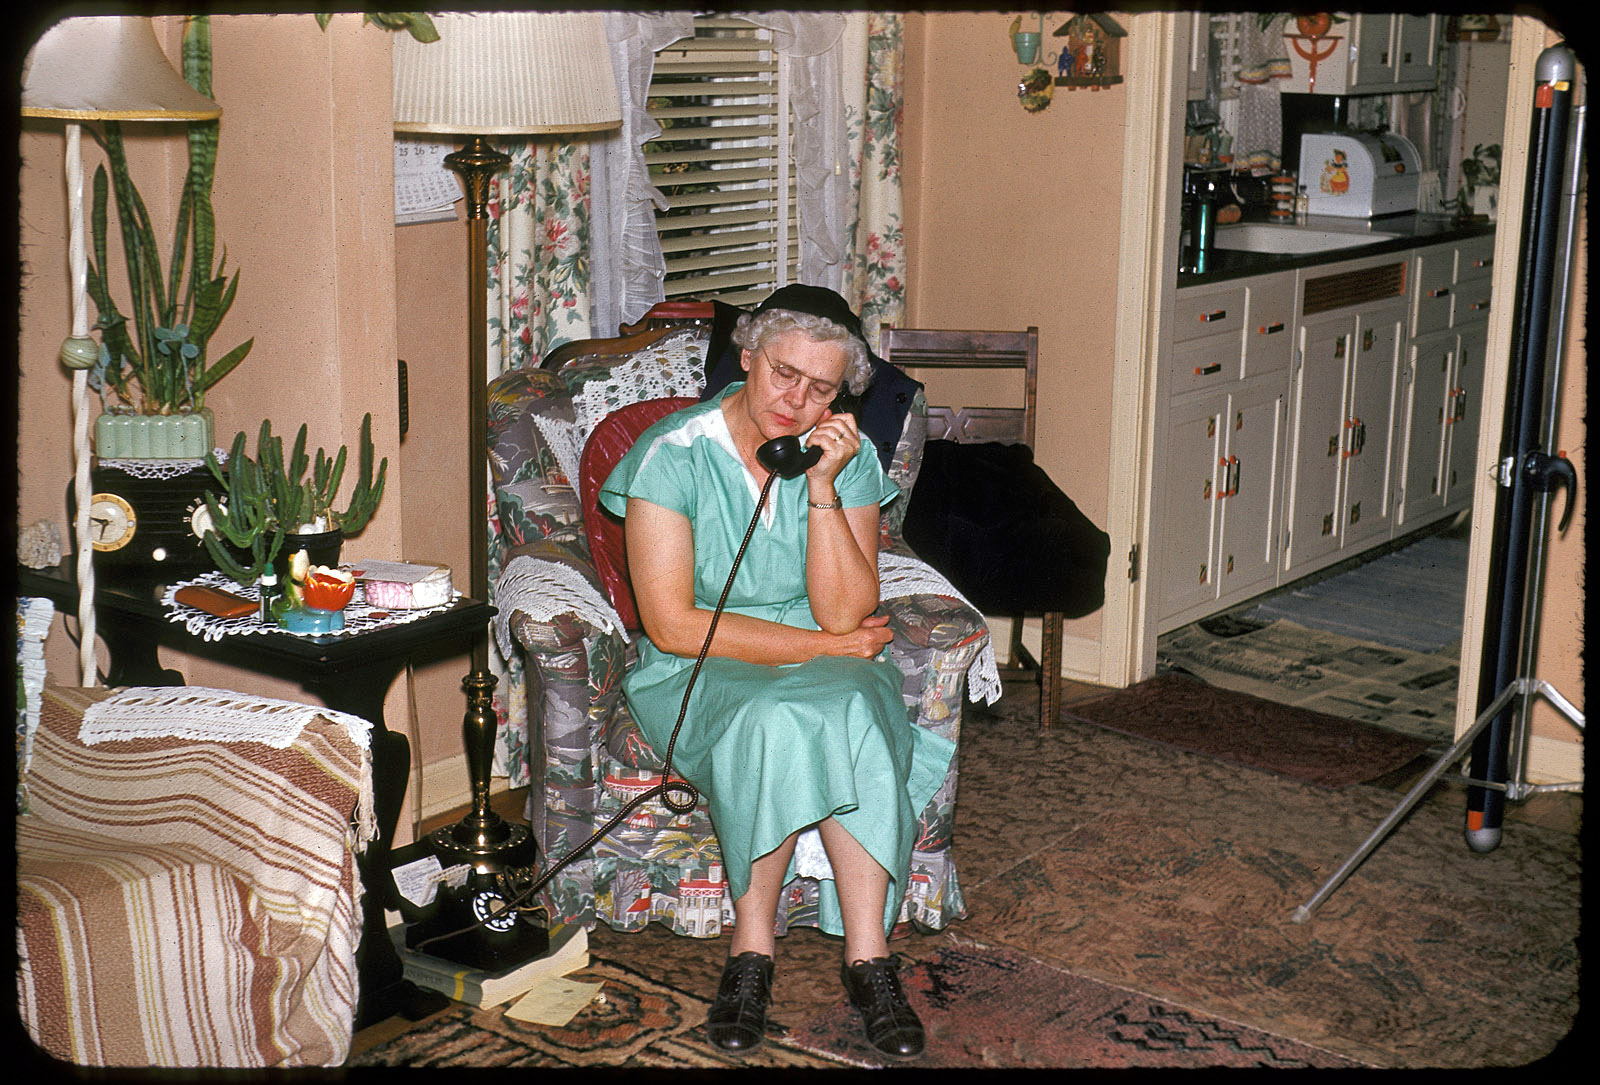 Another slide from Set 2 of found 35mm Kodachromes. On the wall, a September 1952 calendar; on the floor, an Indianapolis phone book. At the right, a projection screen where perhaps this very slide was shown after being developed. In the kitchen: many little decorative decals on the cabinet doors. View full size.